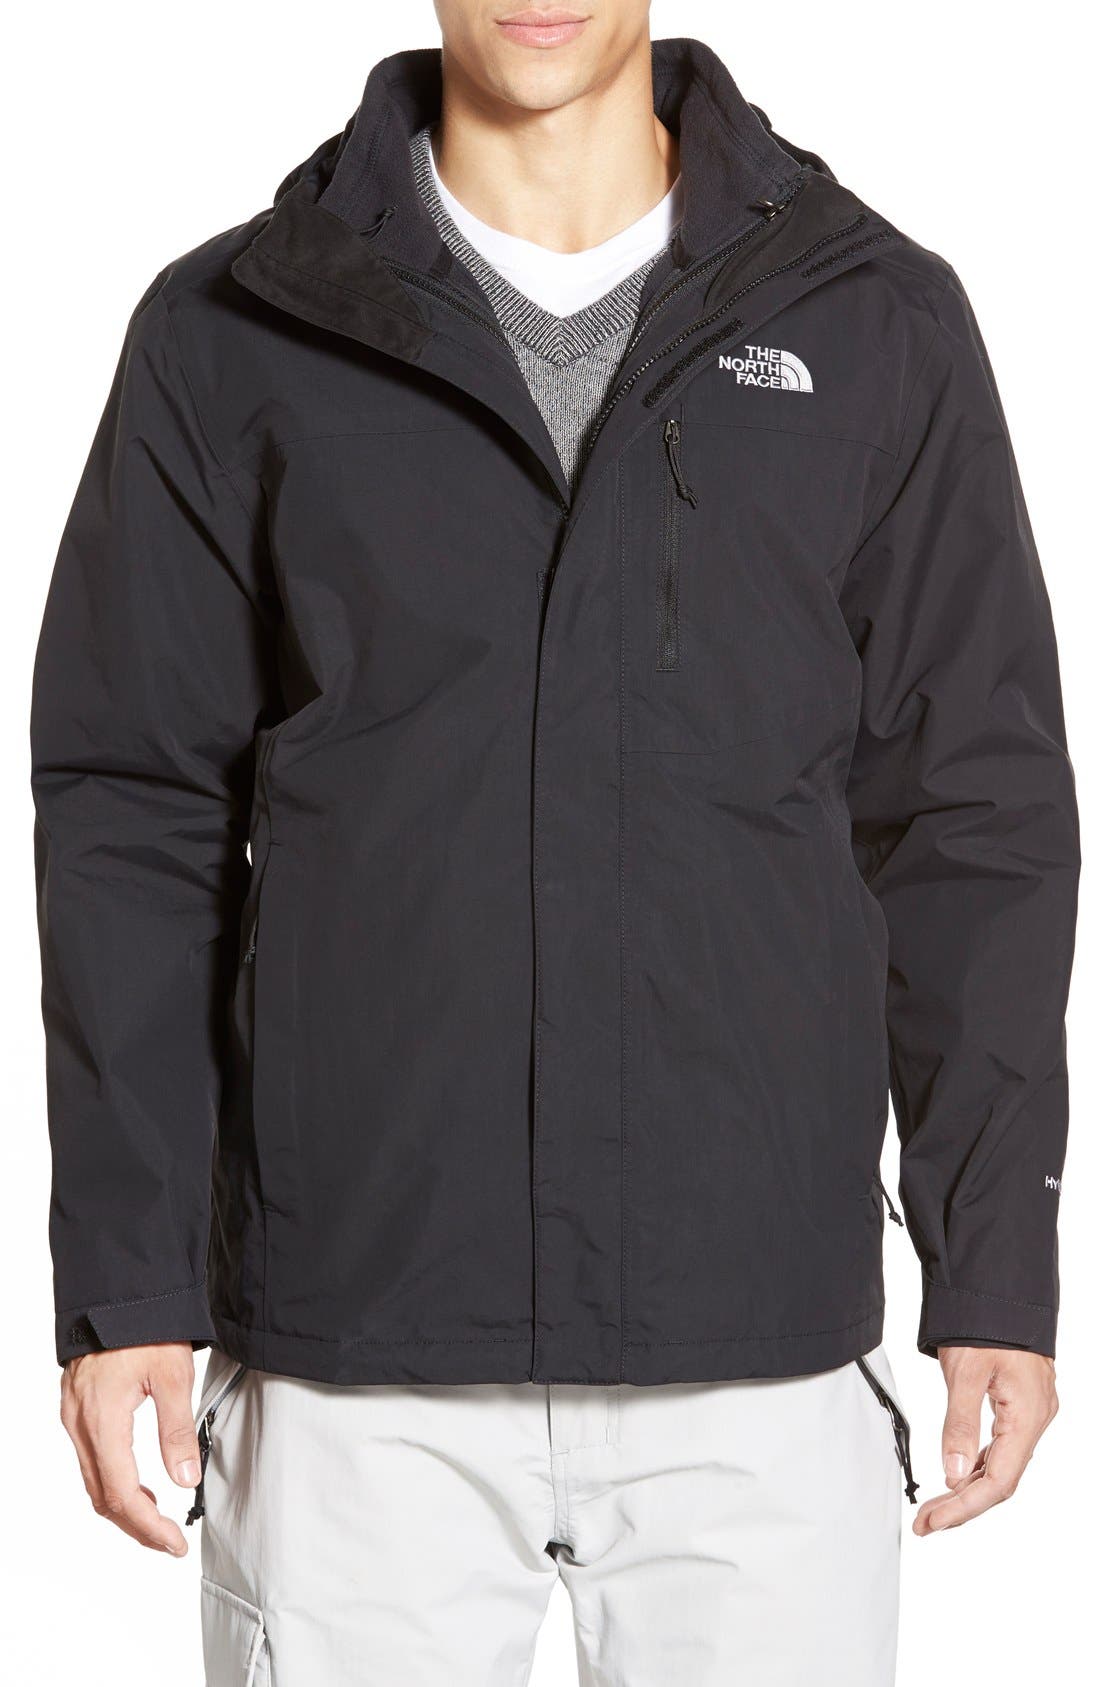 the north face men's atlas triclimate jacket